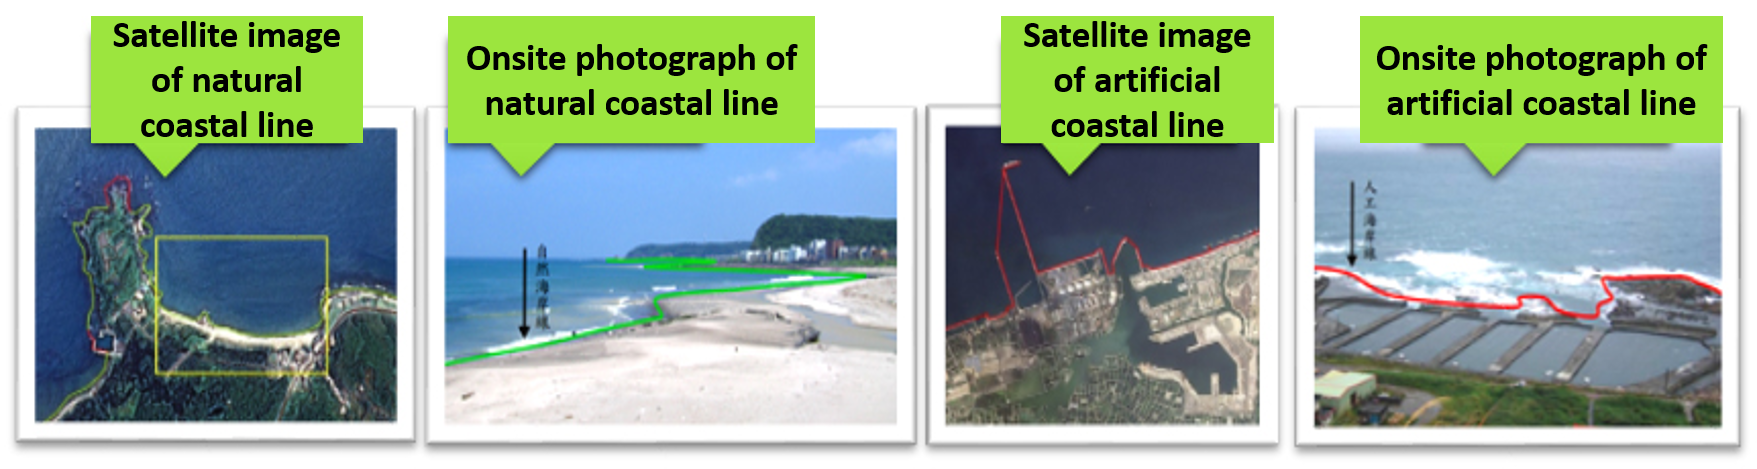 Comparison among multi-temporal satellite images and onsite photographs of artificial and natural coastal lines